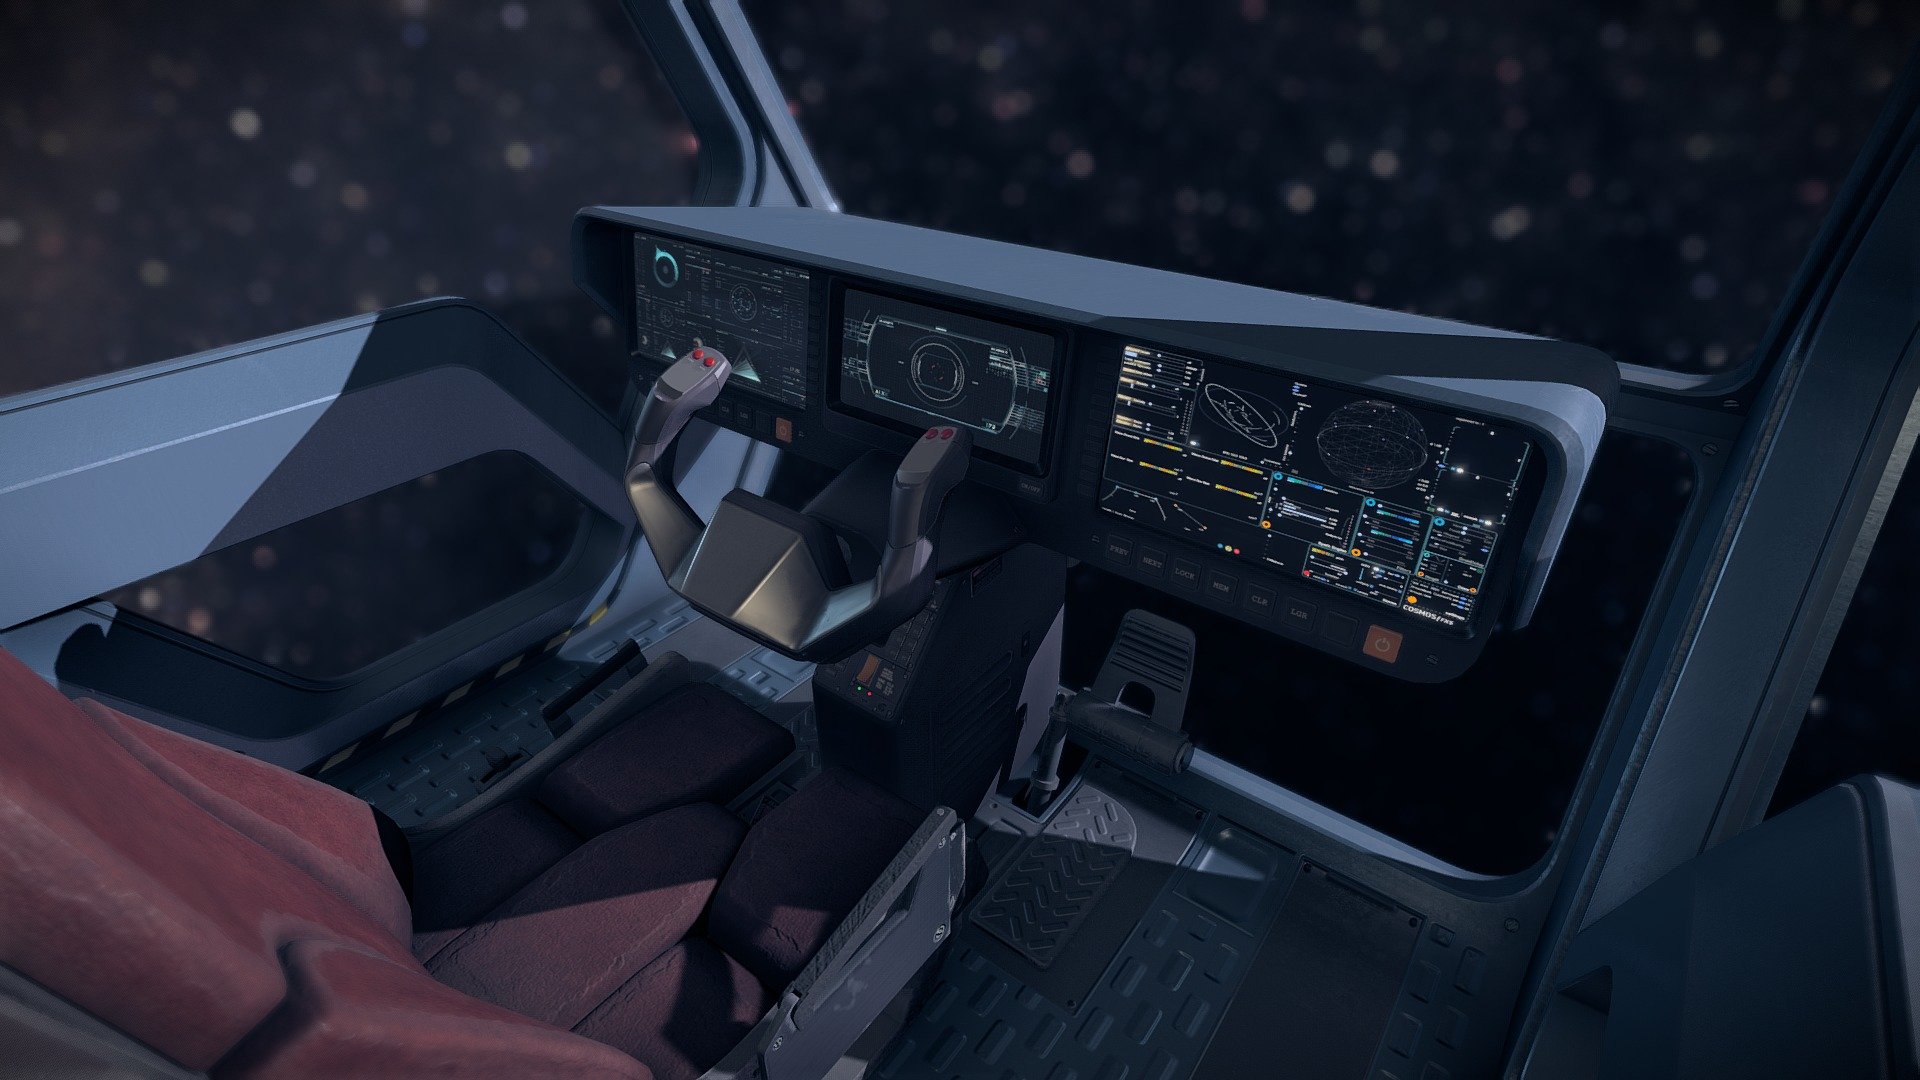 AAA Quality, highly detailed sci-fi cockpit, perfect for any space-sim or VR experience. With 4K resolution PBR Textures.

This is a game ready, optimized 3d asset. It uses the PBR texture standard for full compatibility with any modern game engine, rendering software or 3d program. If you have any questions, dont hesitate to send me a message.

This Package contains:




3D Model in multiple formats (.max, .fbx, .obj, .3ds) with separated sub-components for easy animations.

3 Cockpit variants: Single seat with joysticks, single seat with yoke and double seat with joysticks.

Animation for opening side doors

4K PBR Textures (2 sets: Cockpit, Glass, each in 2 styles (Clean and Weathered), and PSD to customize paint and seat colors)
****Textures: All textures provided in .psd or .png format. The following texture maps are included: Albedo, Normal, Metallic, Roughness, Metallic/Roughness(A), Metallic/Smoothness(A), Ambient Occlusion, Emissive, Opacity(for glass).
 - Sci Fi Cockpit 8 - 3D model by VattalusAssets 3d model